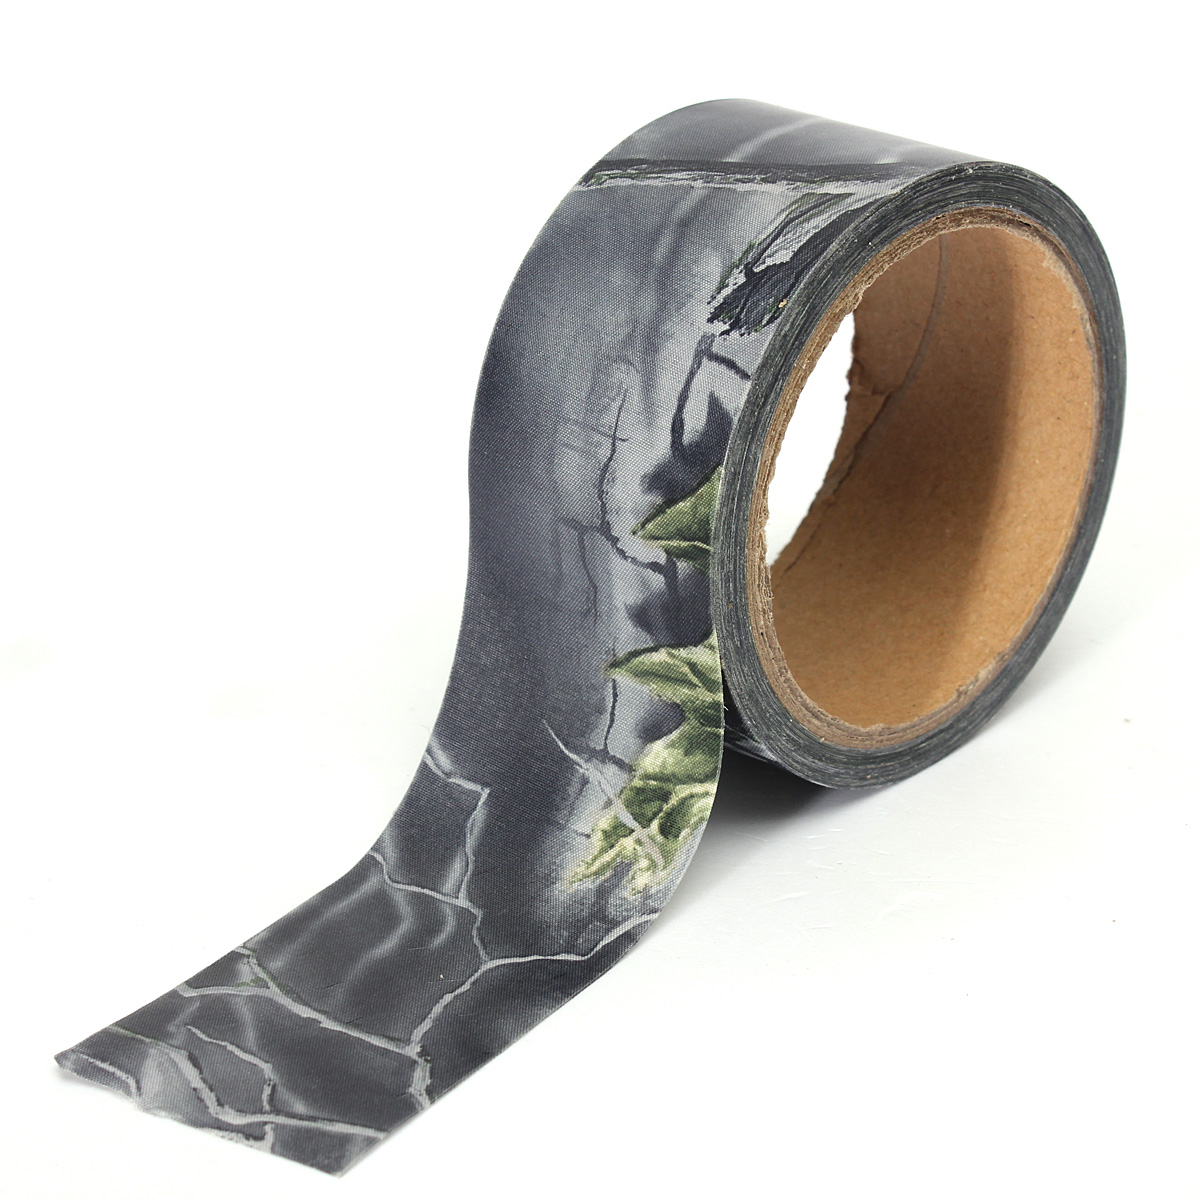 10M-Camouflage-Wrap-Tape-Camo-Tape-Duct-Waterproof-Mutifunctional-Fabric-Camping-Stealth-Tape-1310100-5